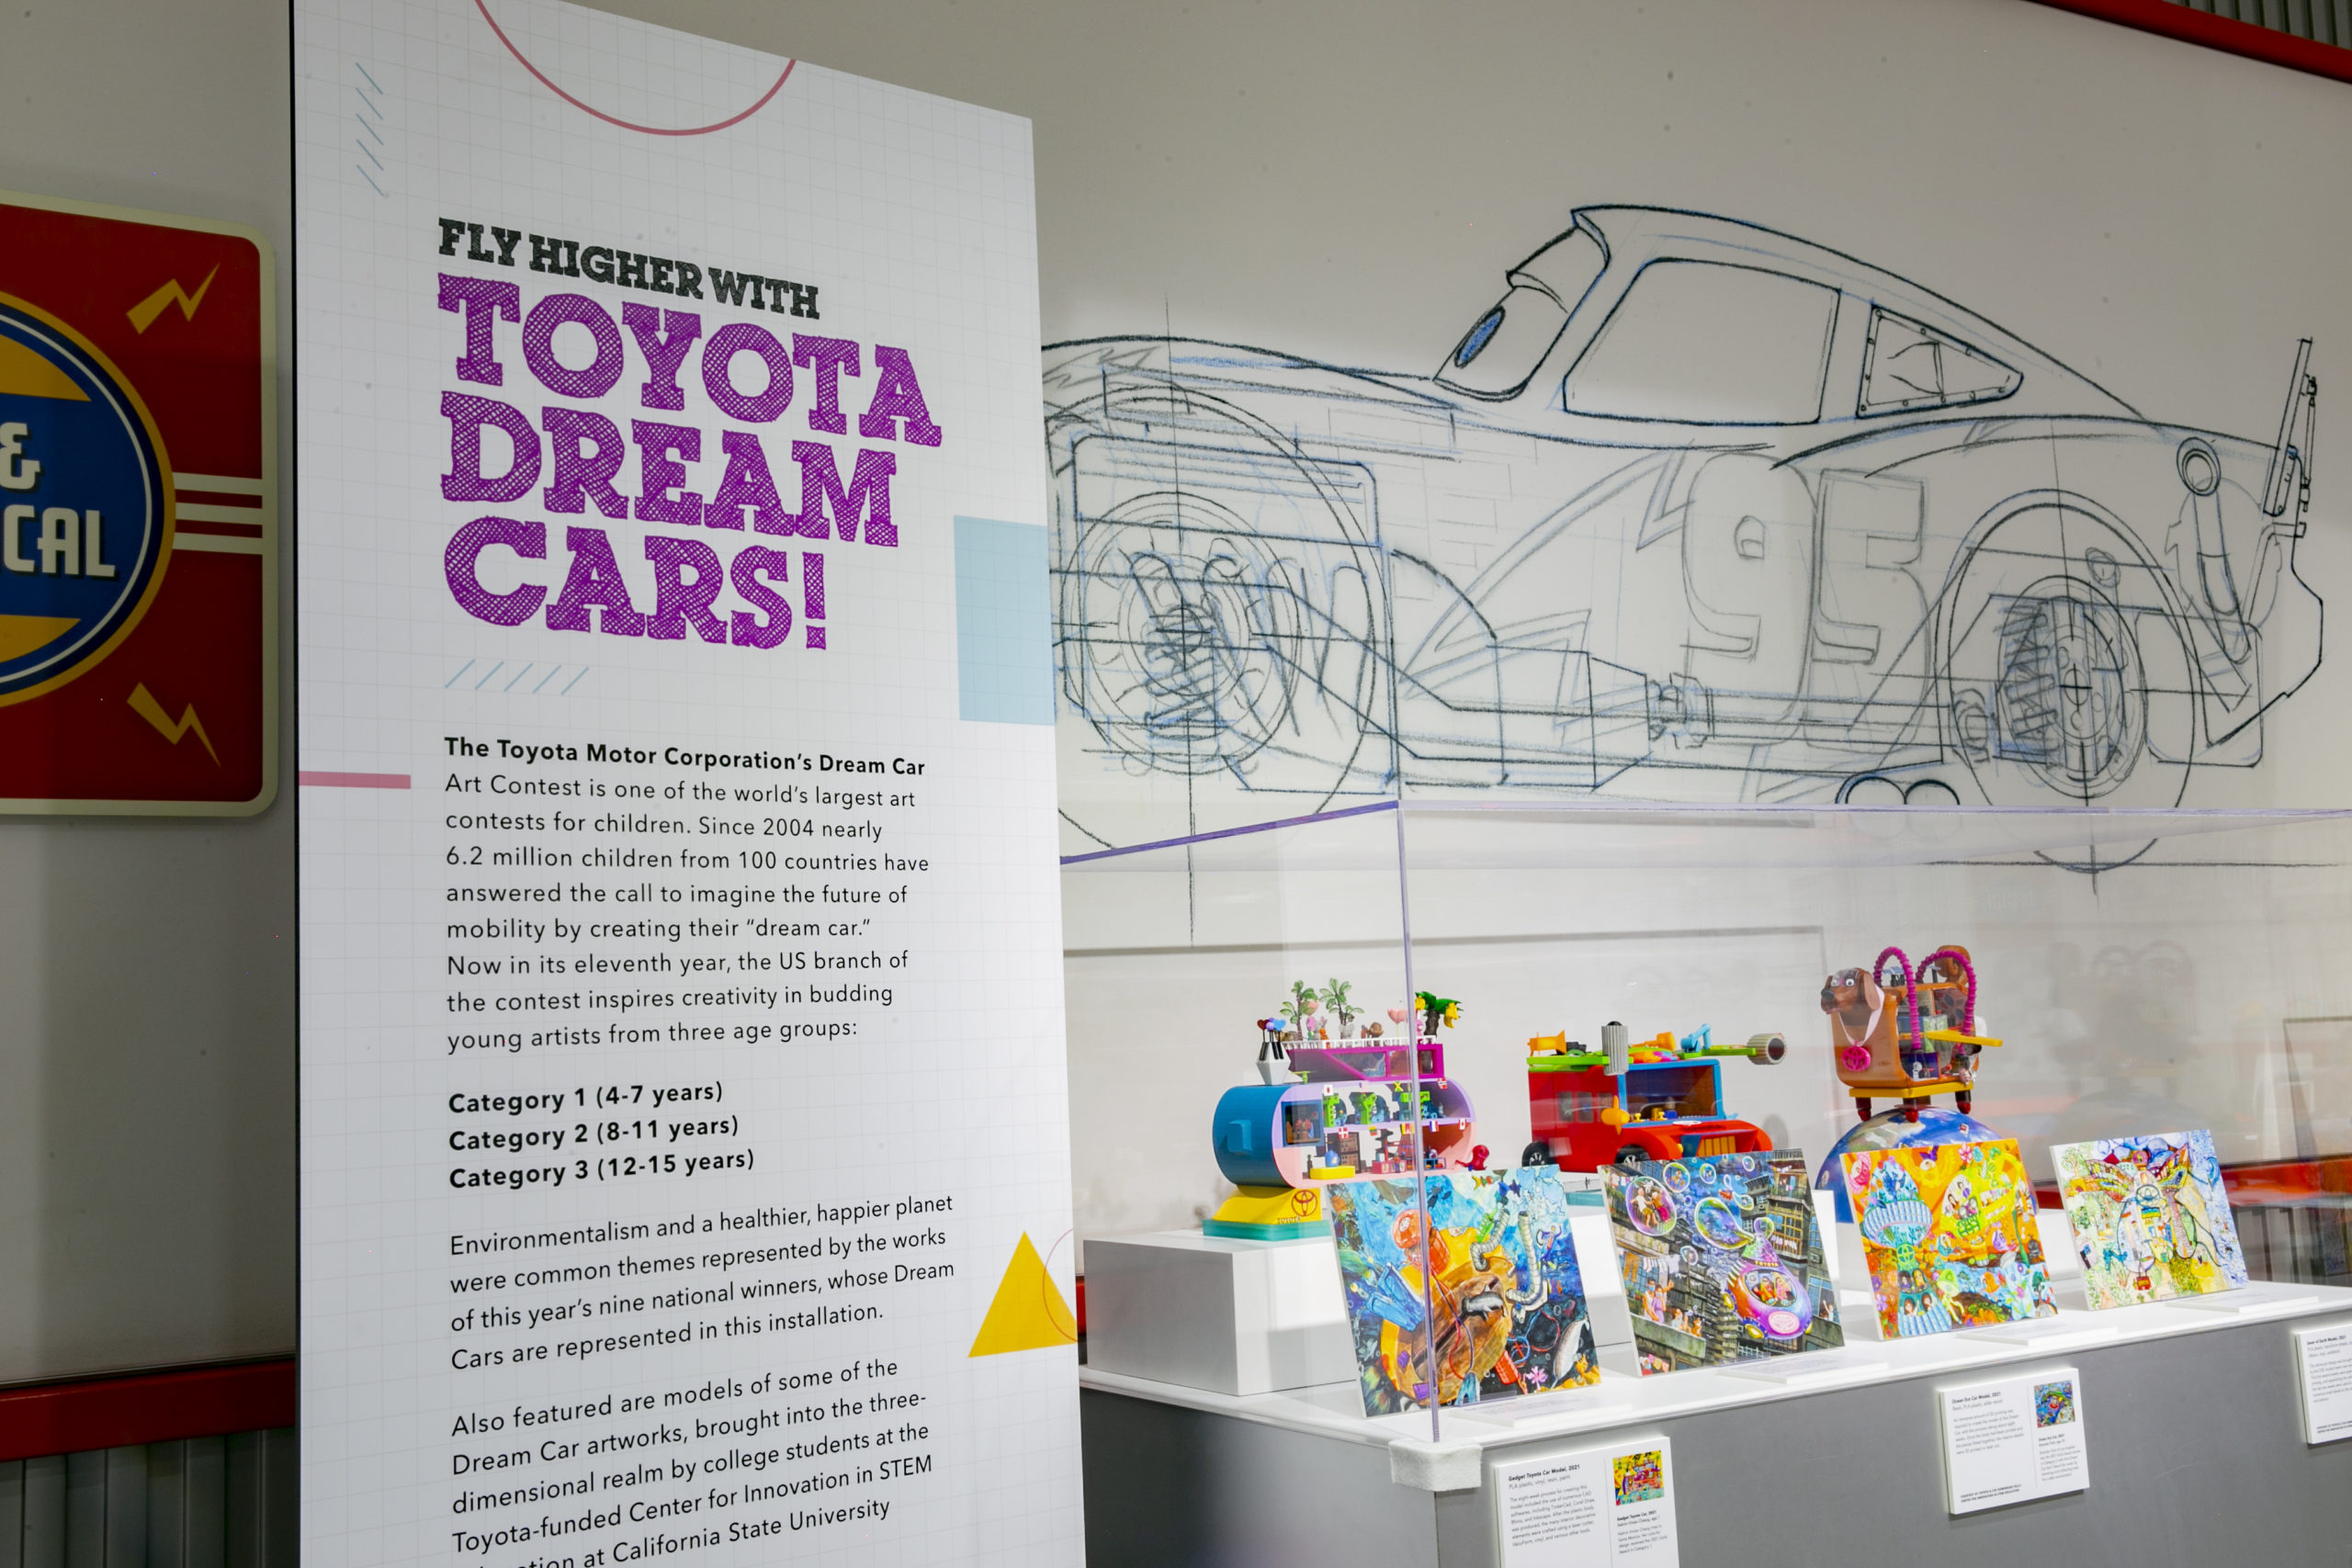 A display of the Toyota Dream Car models inside the Petersen Automotive Museum, with a large display sign describing the project.